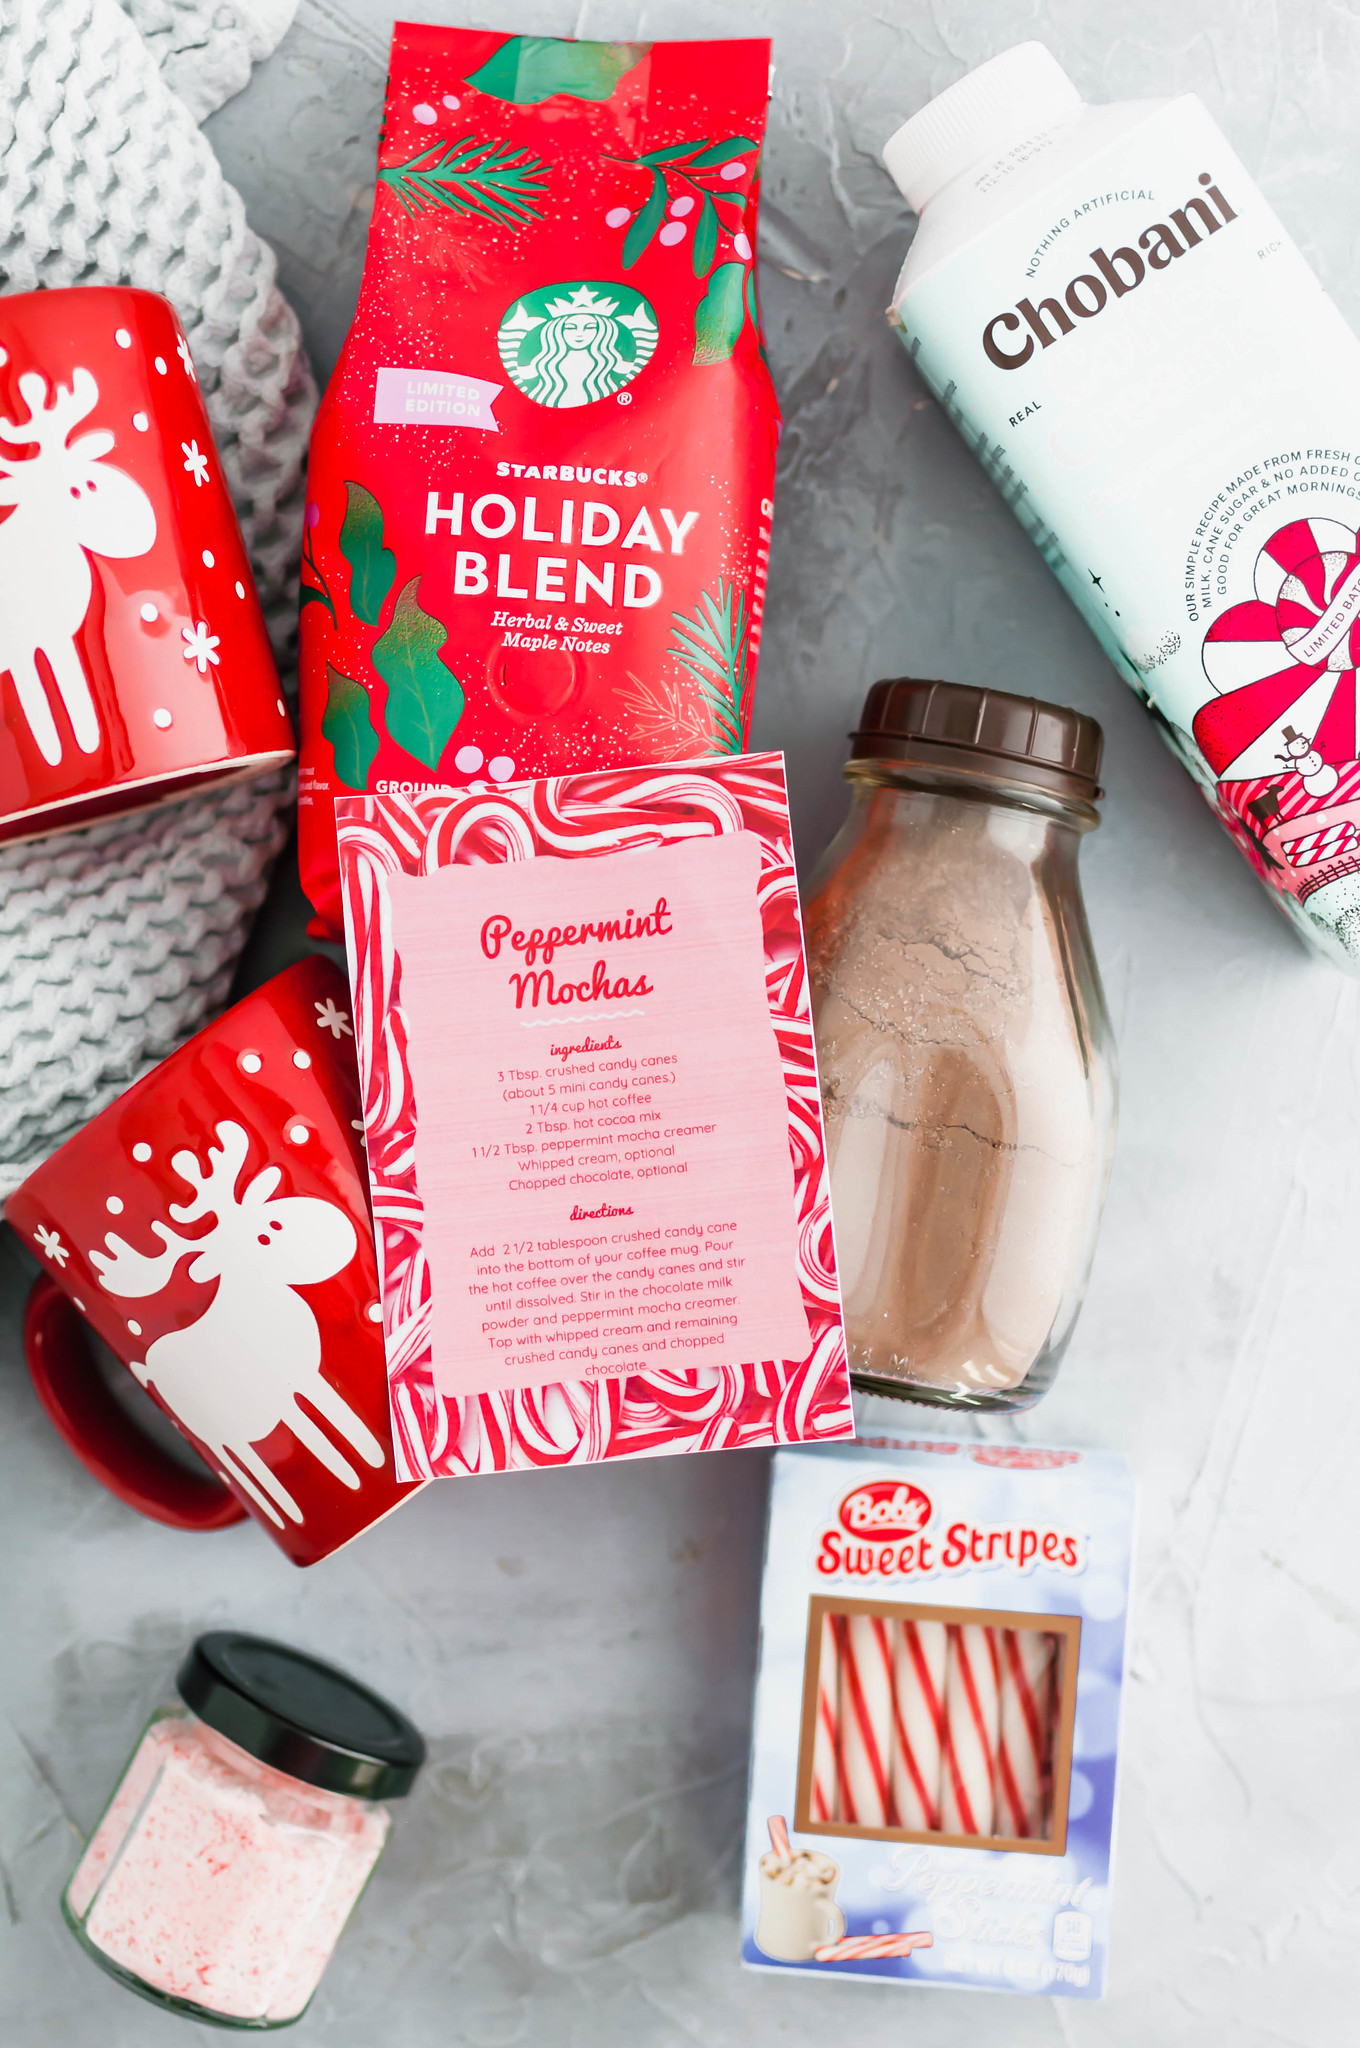 Looking for a fun, festive gift for a coffee lover in your life?! This Peppermint Mocha Kit is simple to put together and totally unique. All the ingredients required to make my delicious peppermint mochas in a fun tin or basket. Include the free printable recipe card so the recipient knows just how to make their delicious peppermint mocha at home.